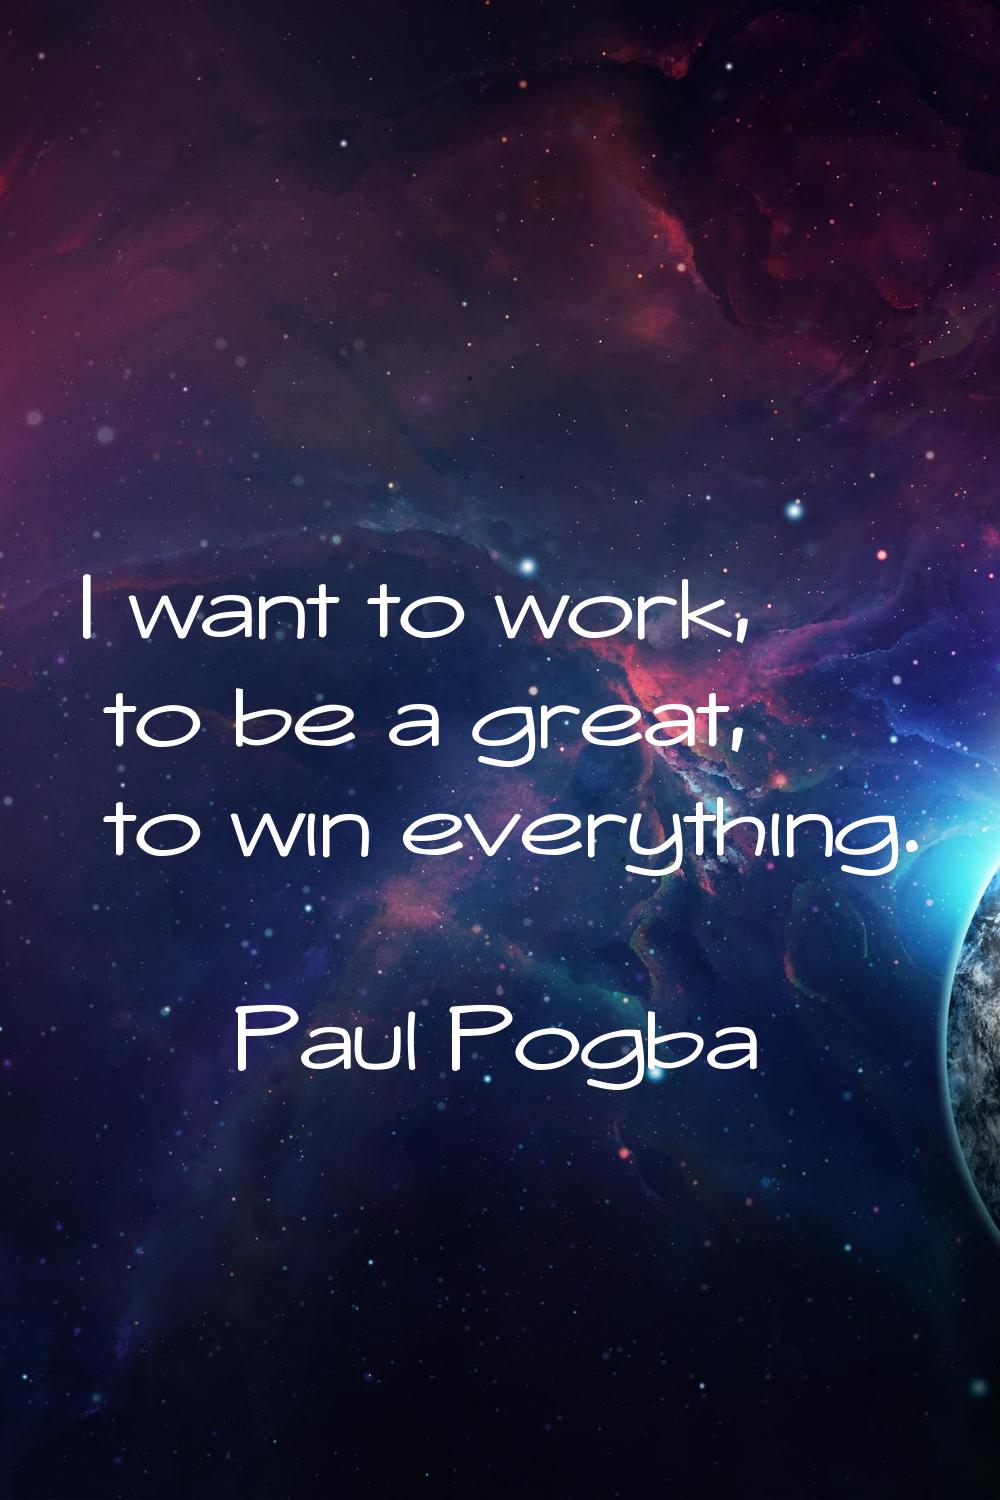 I want to work, to be a great, to win everything.